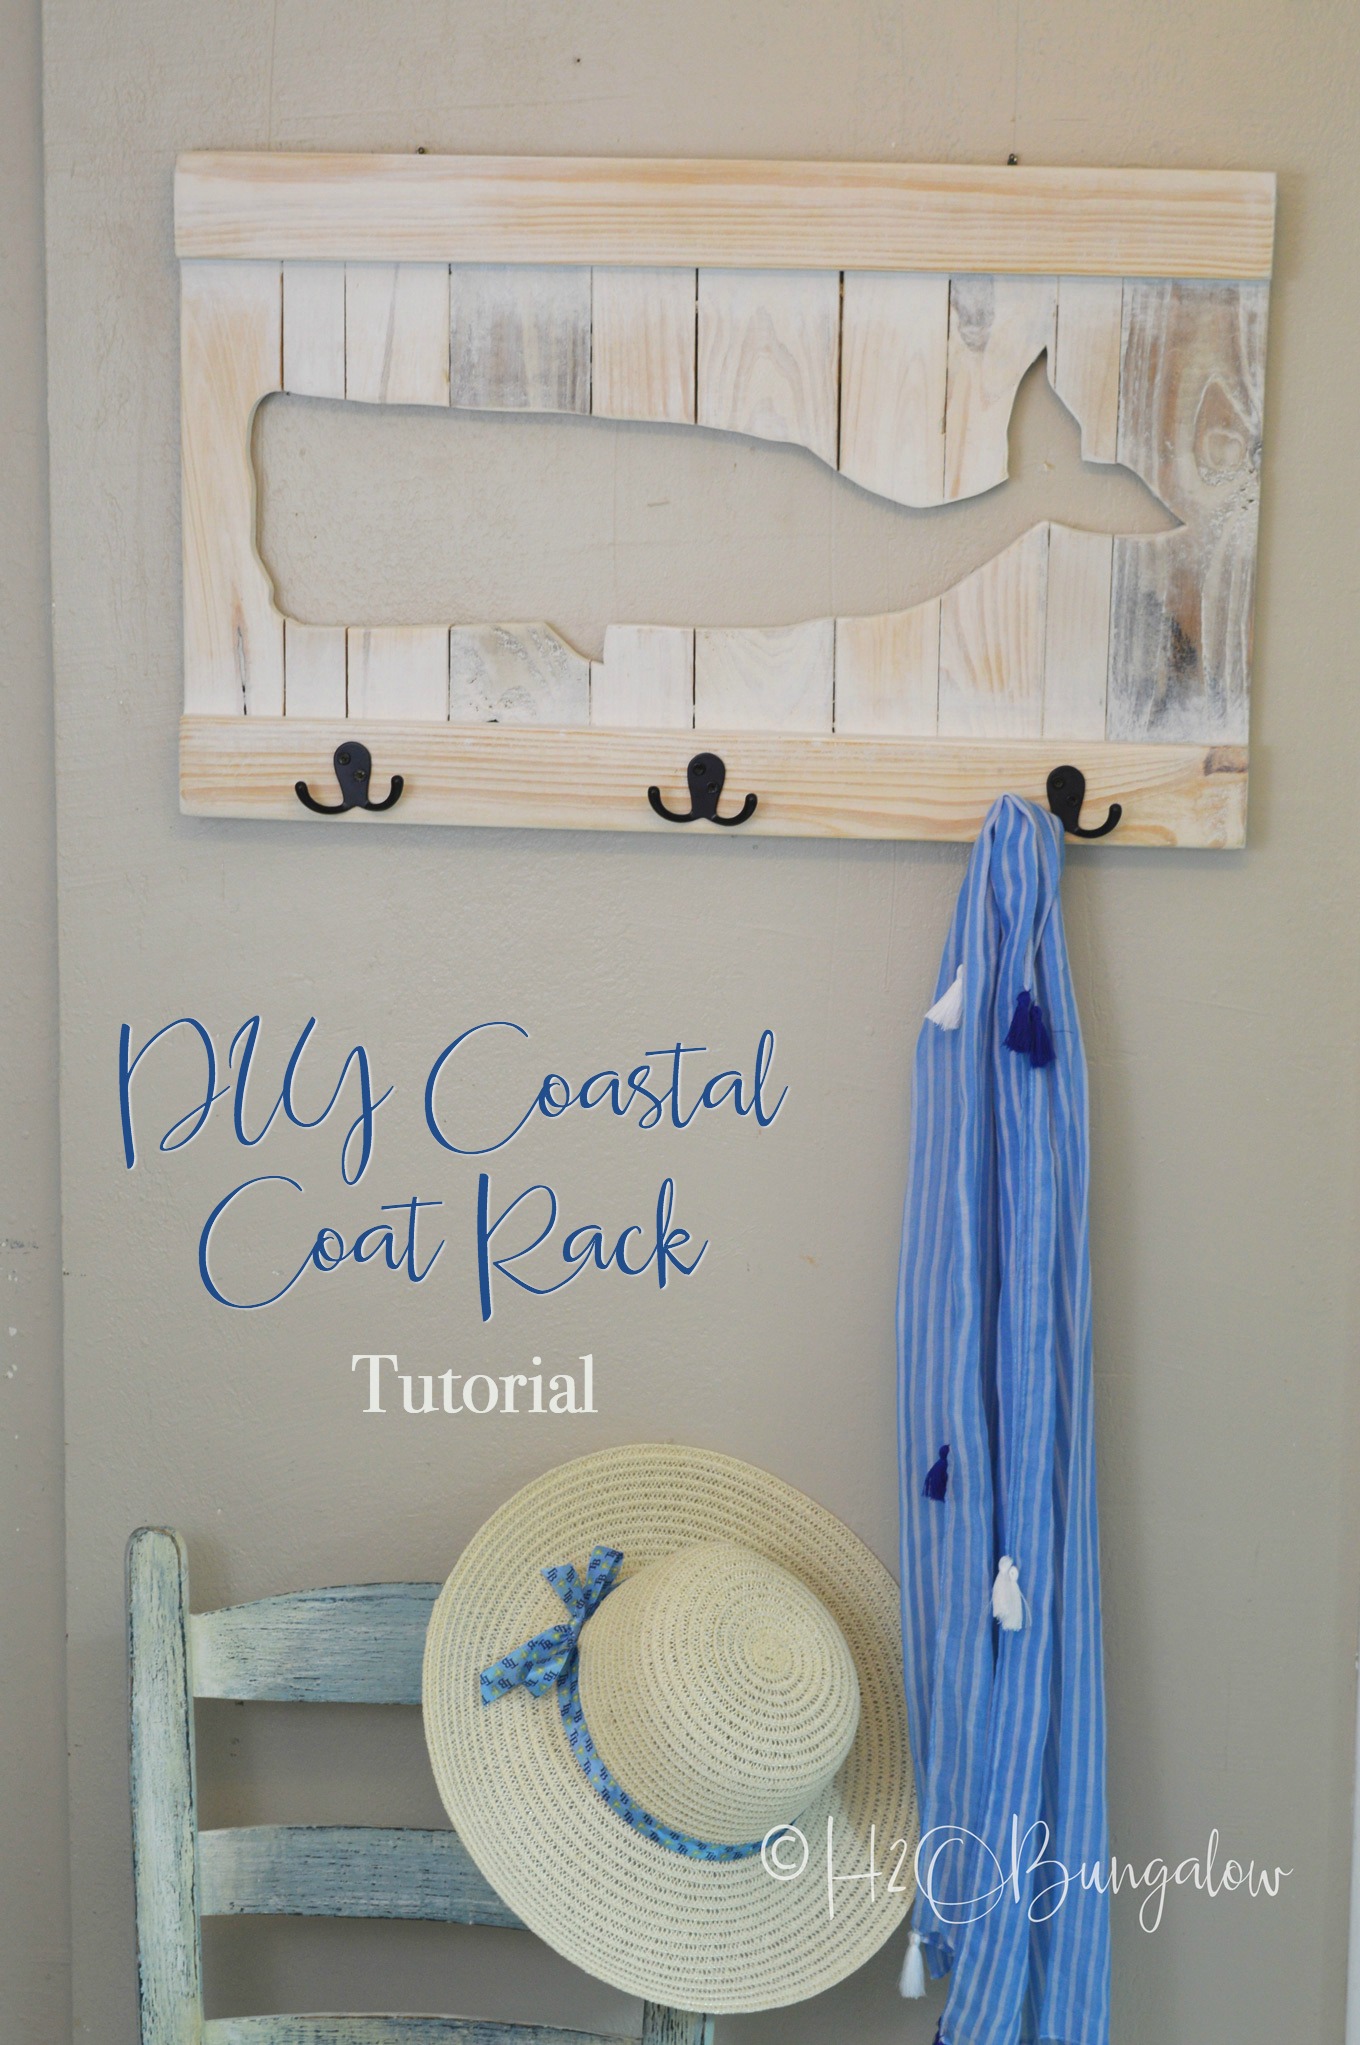 You can easily make a DIY whale coat rack or towel rack for beach towels like mine out of pallets or scrap wood. Follow my instructions for a wood cut-out whale and use your own design to make a sturdy custom coat or towel rack that fits your decor style! 